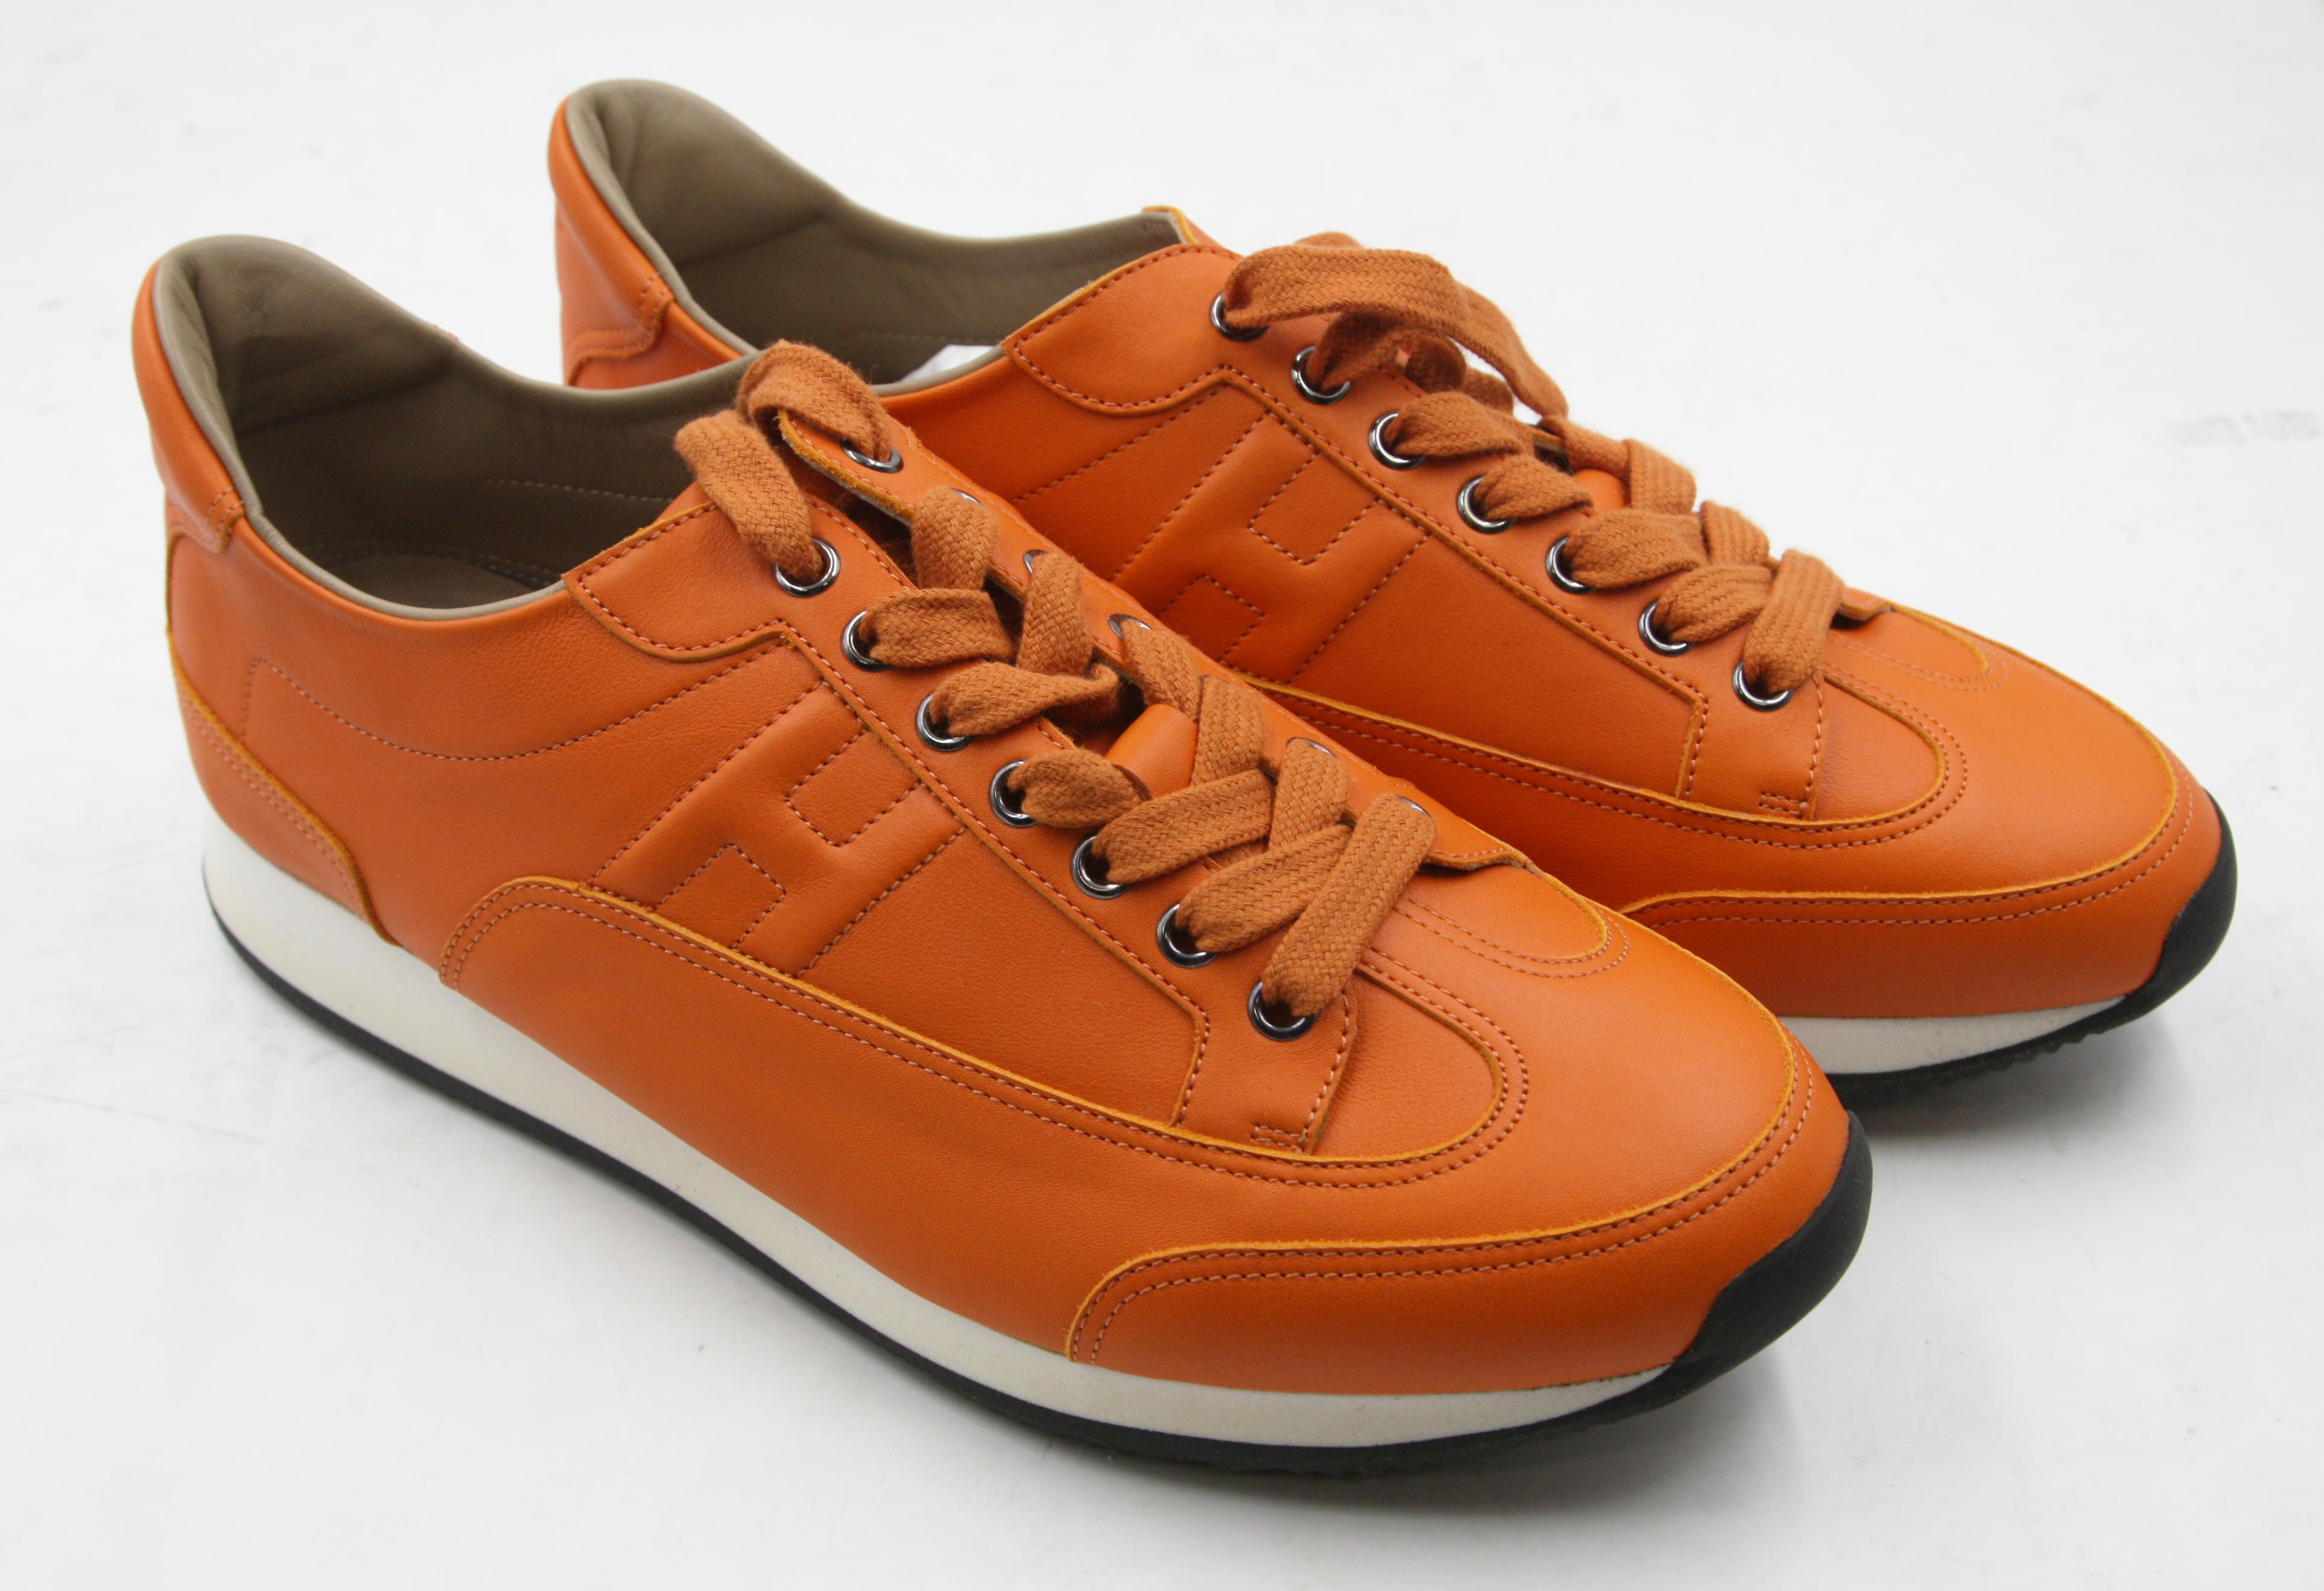 Brand: HERMES
Gender: mens
Color: Orange
Size: EU 41.5 (Men)

It is a complete new article with a box and dusty bag.